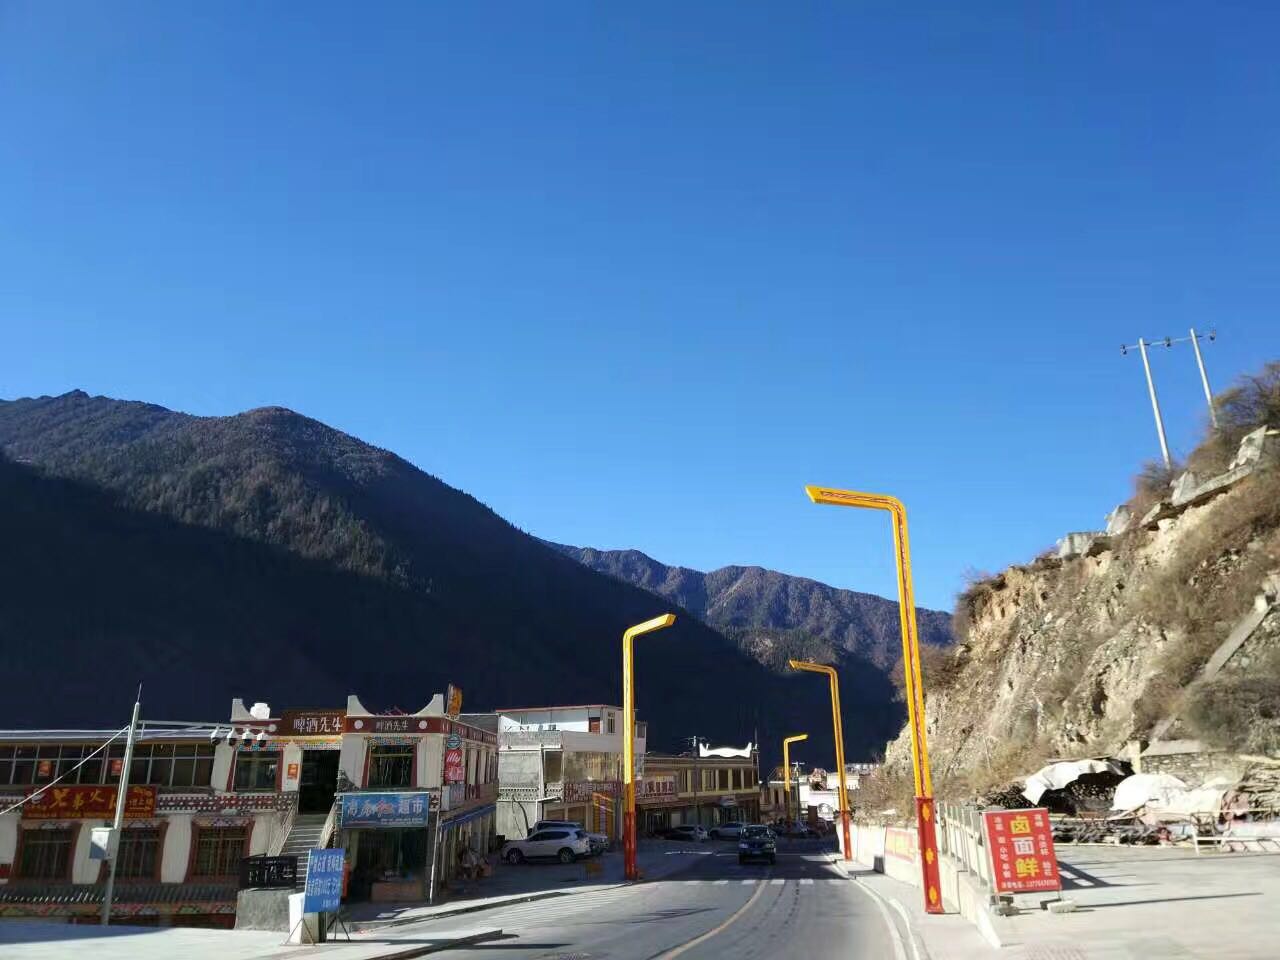 When I reached to the Tibetan regions